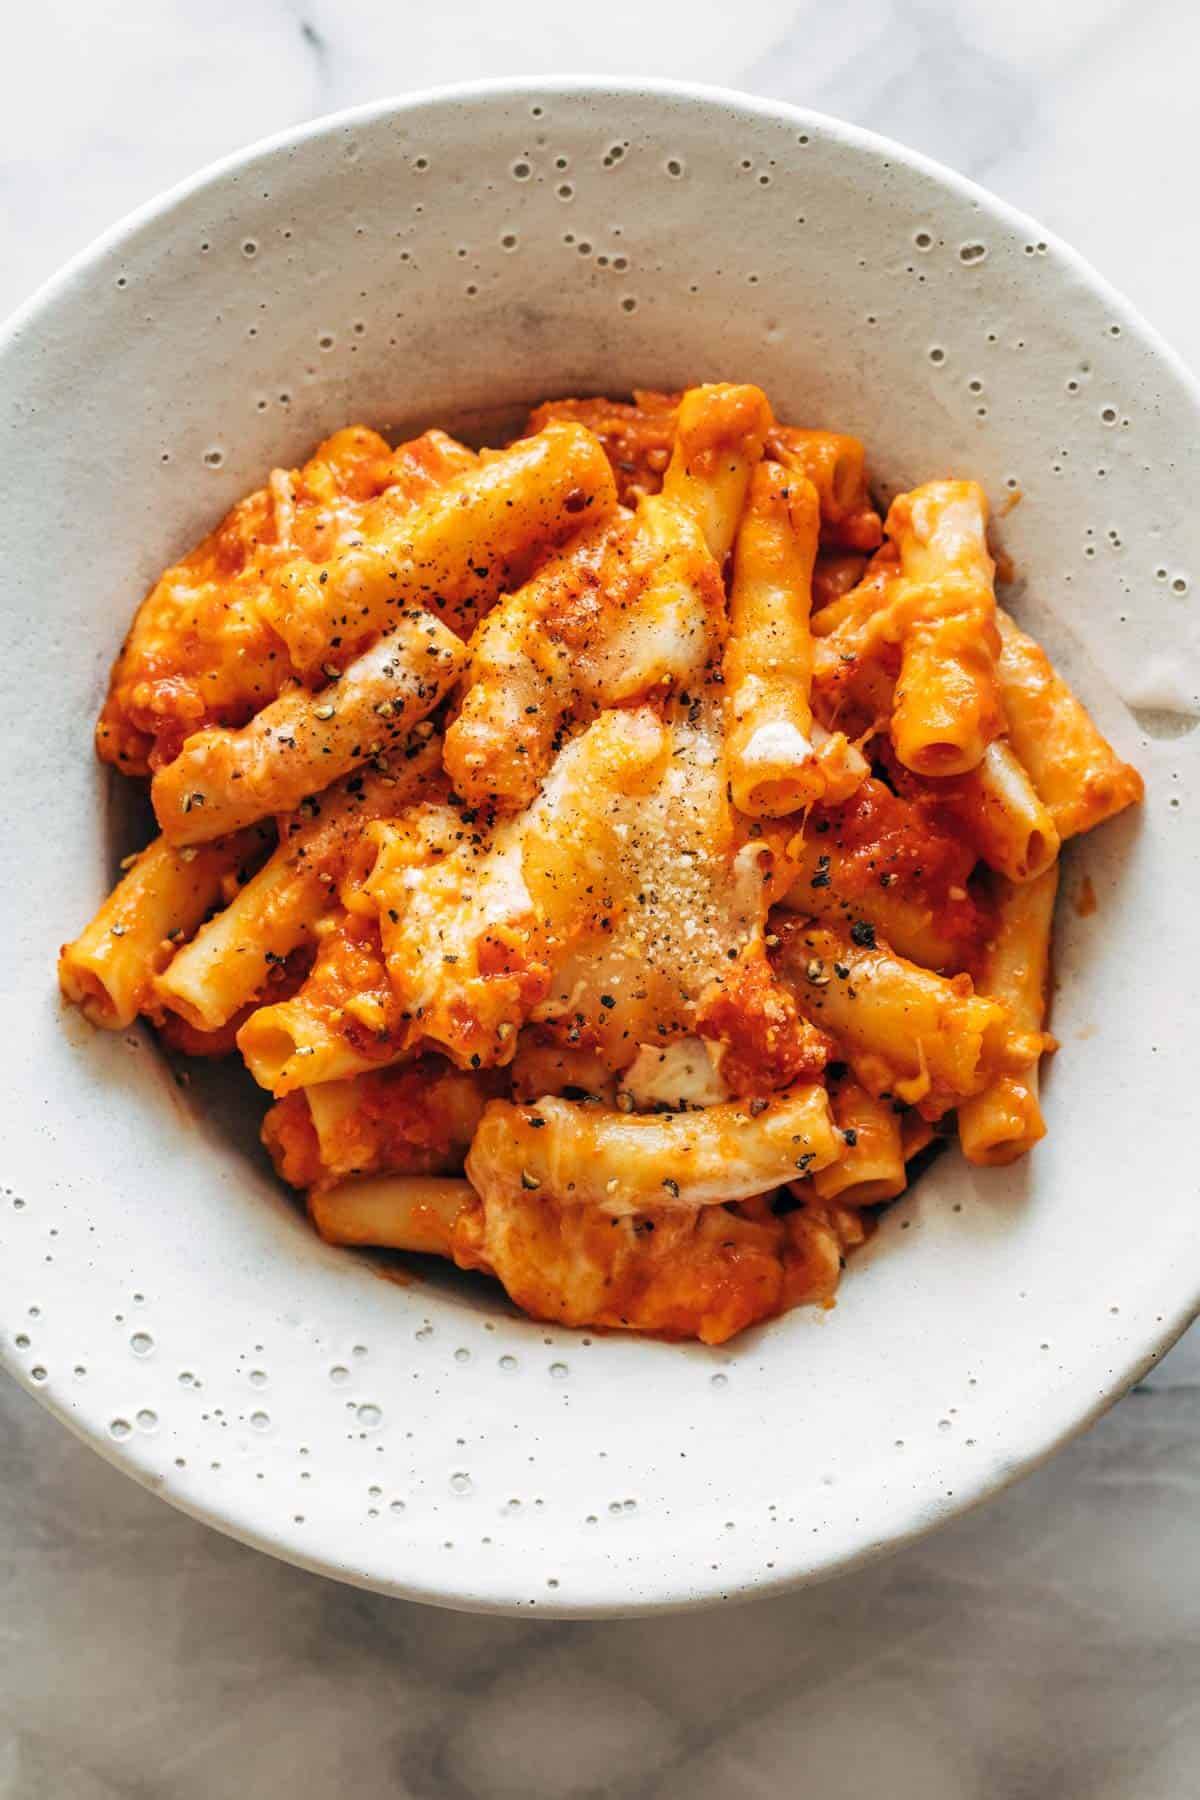 Baked ziti in a bowl with pepper.